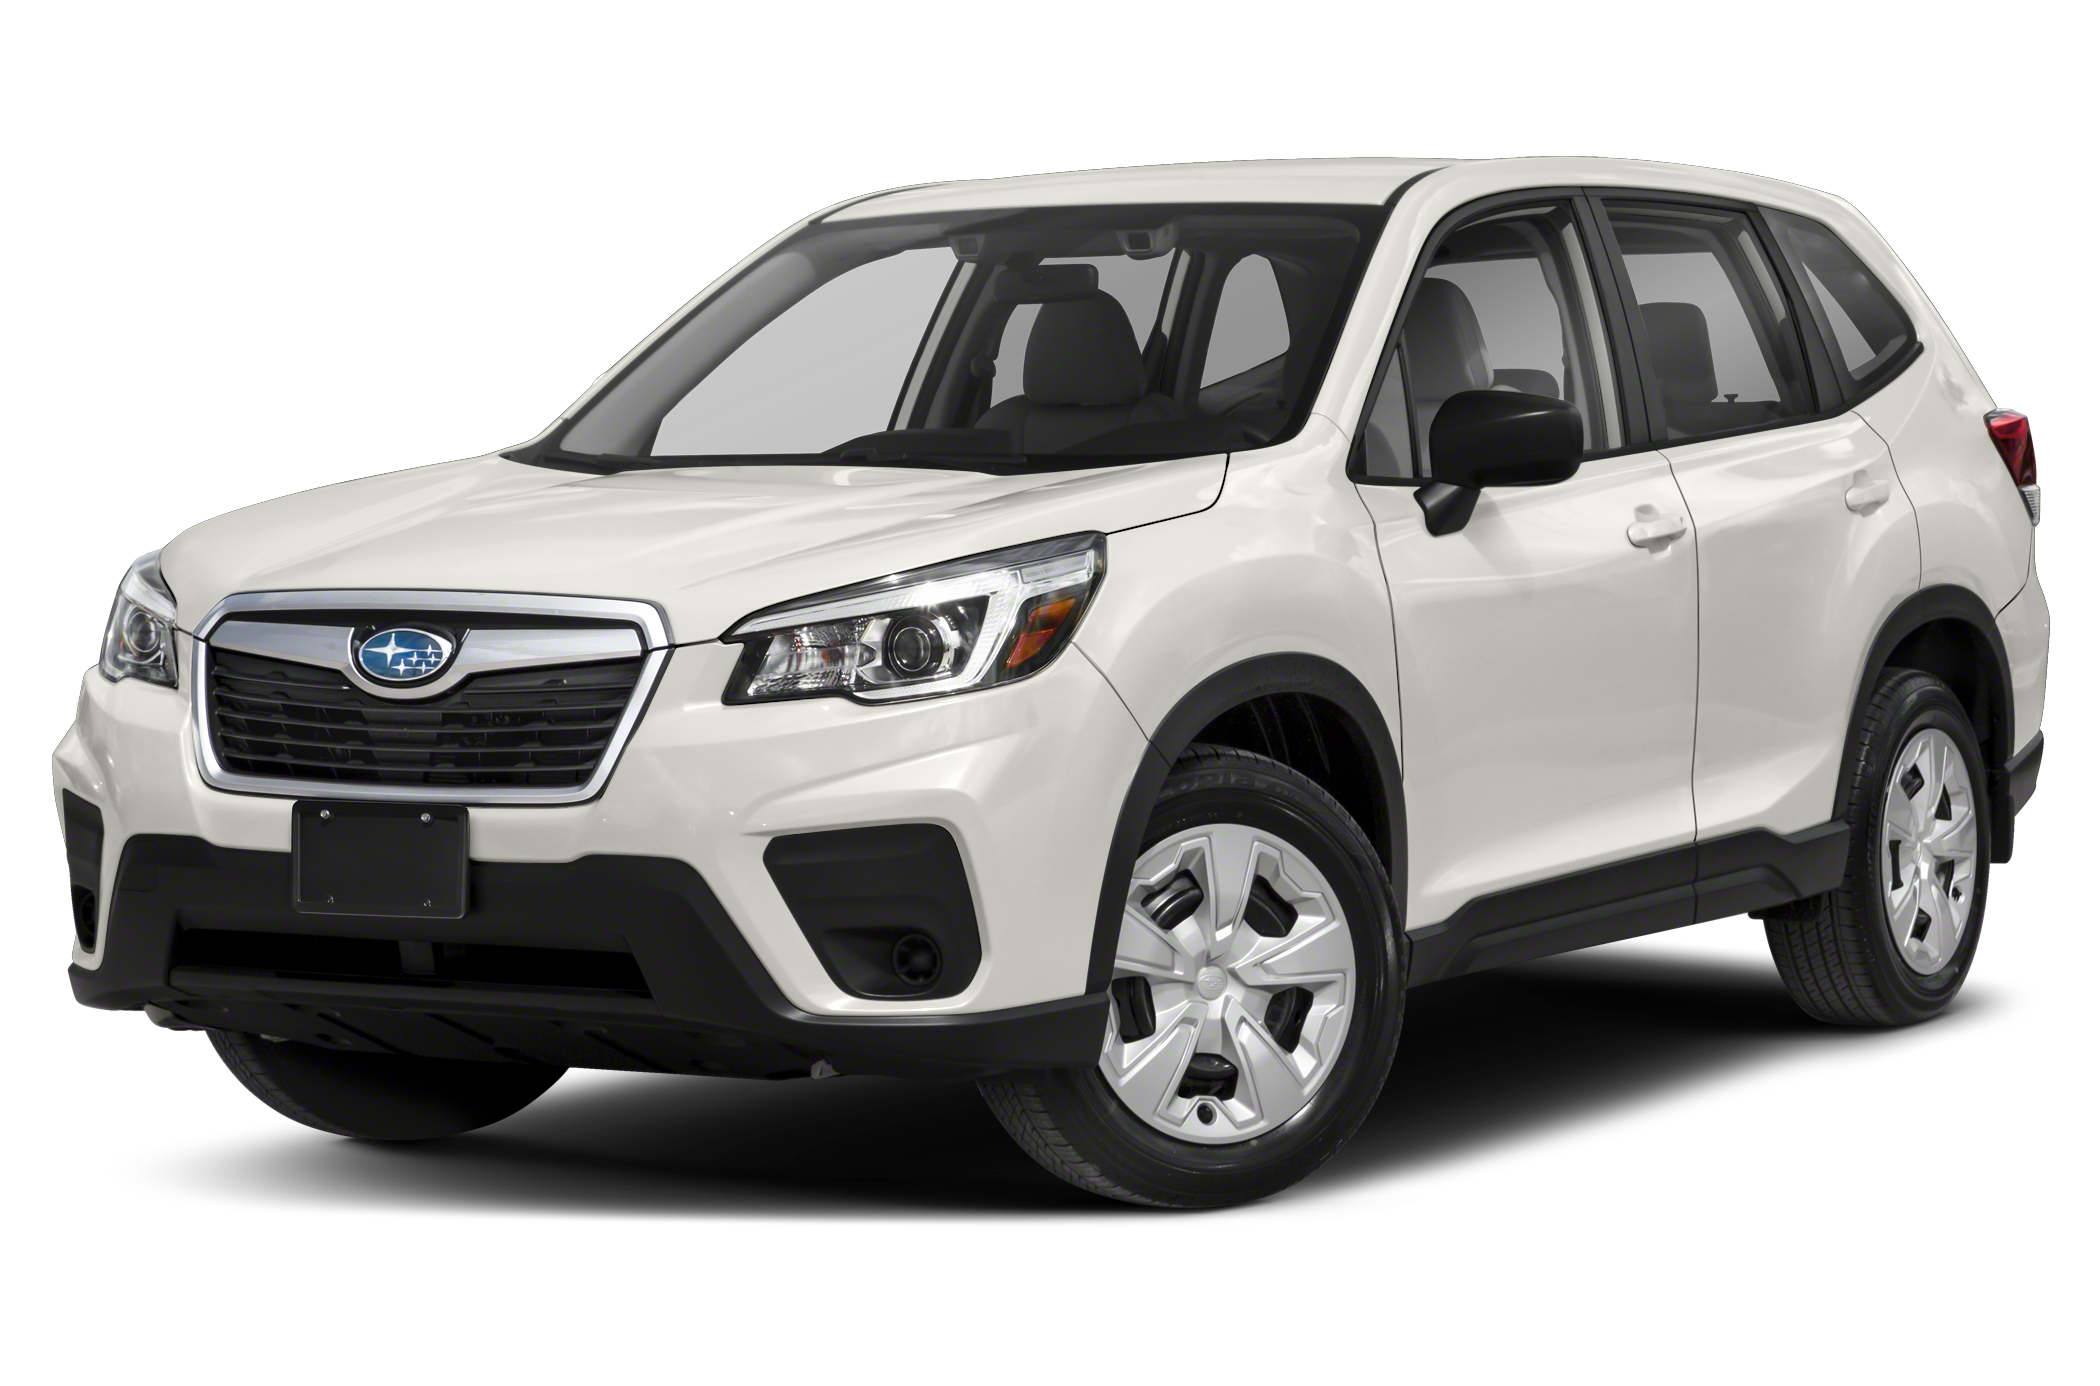 2021 Subaru Forester - View Specs, Prices & Photos - WHEELS.ca